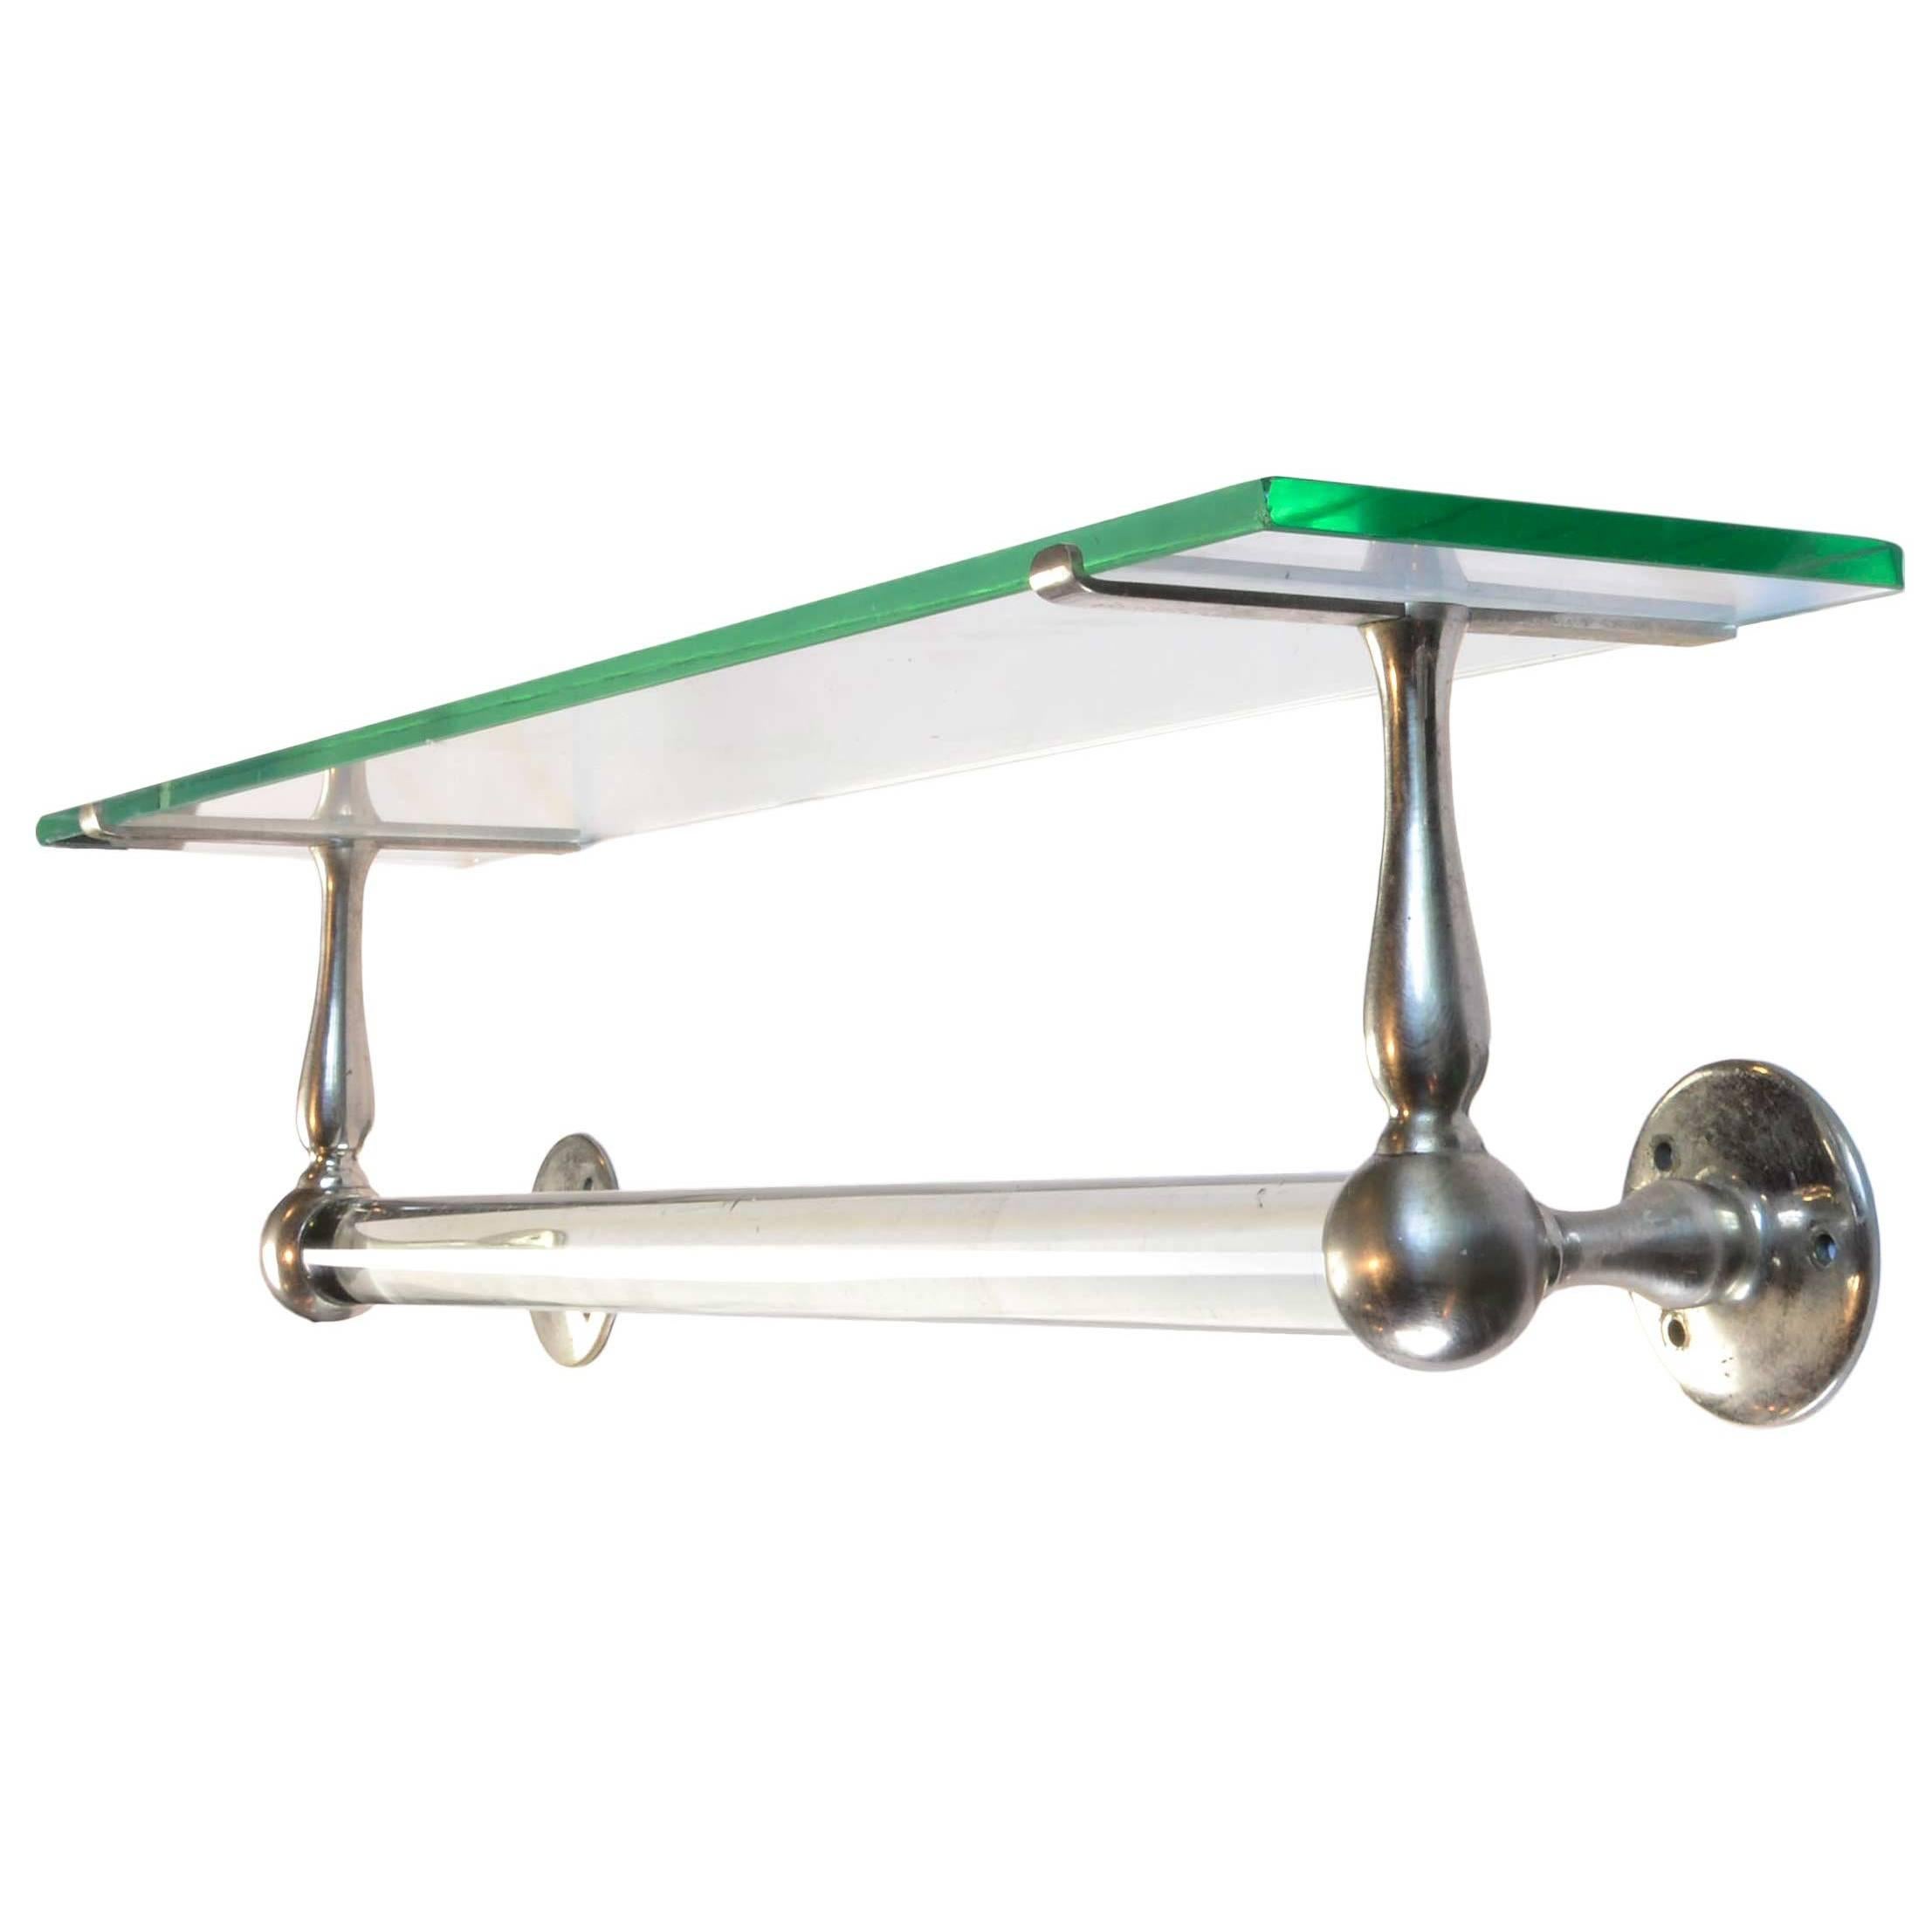 Early 20th Century Nickel-Plated Glass Shelf and Towel Bar